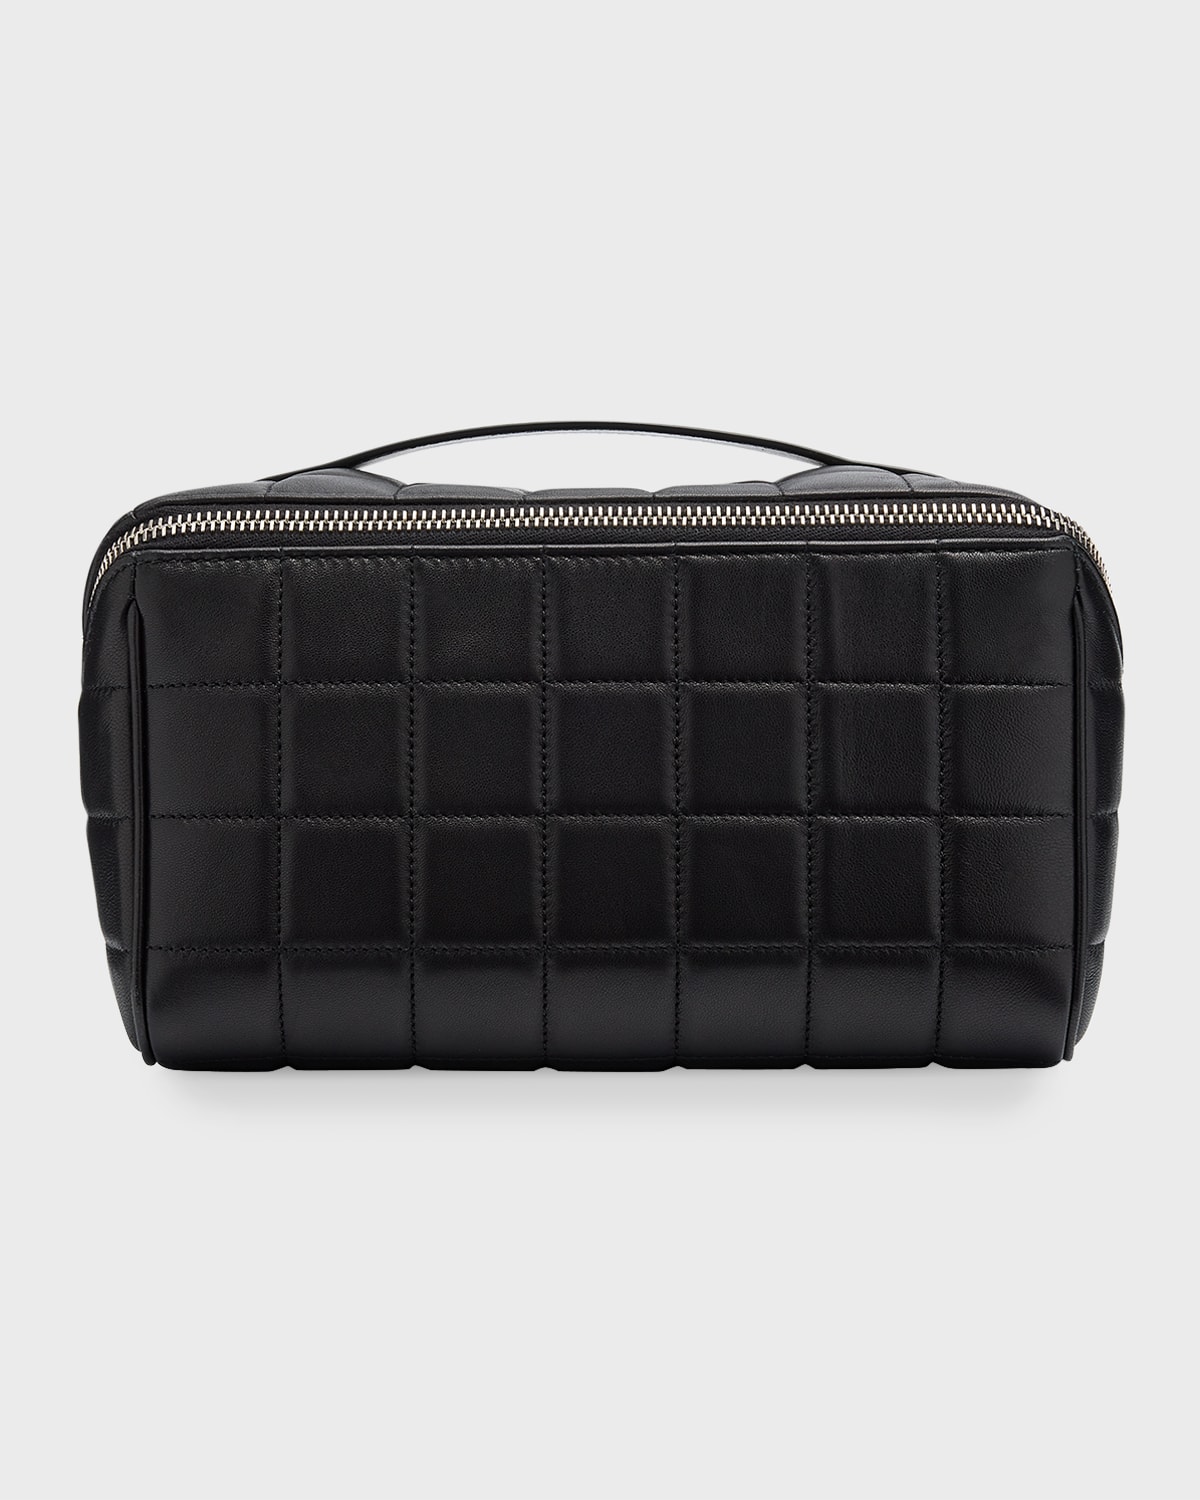 Men's Paris Quilted Leather Toiletry Bag